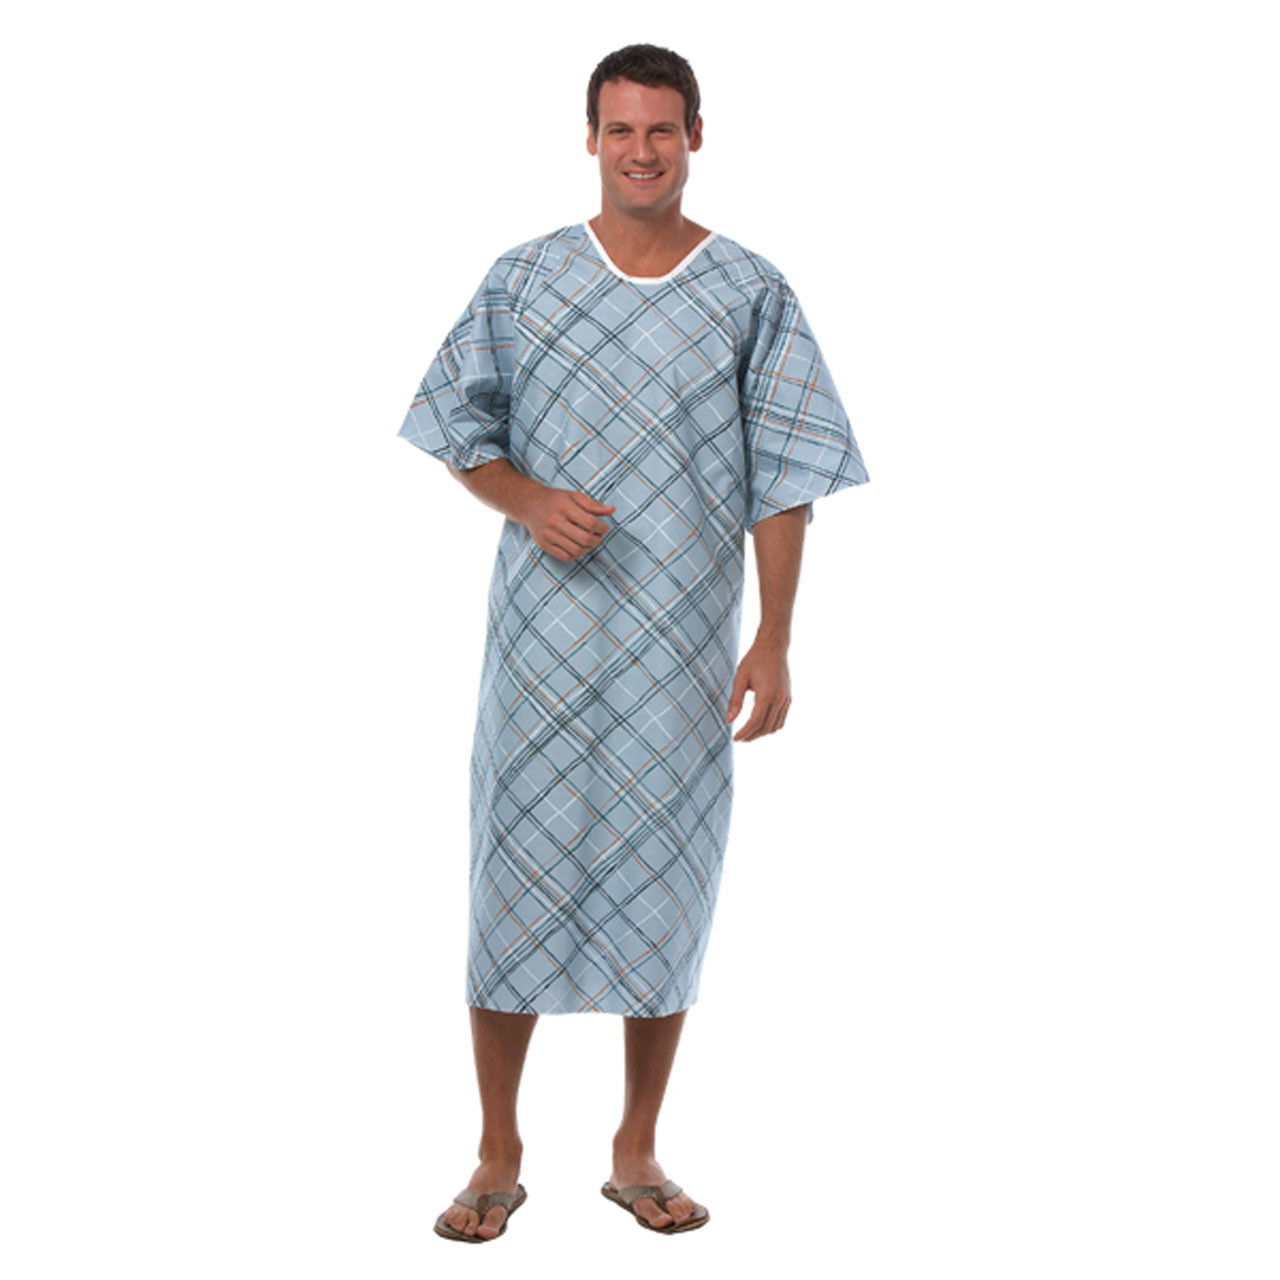 What material is the wholesale hospital gown made of?